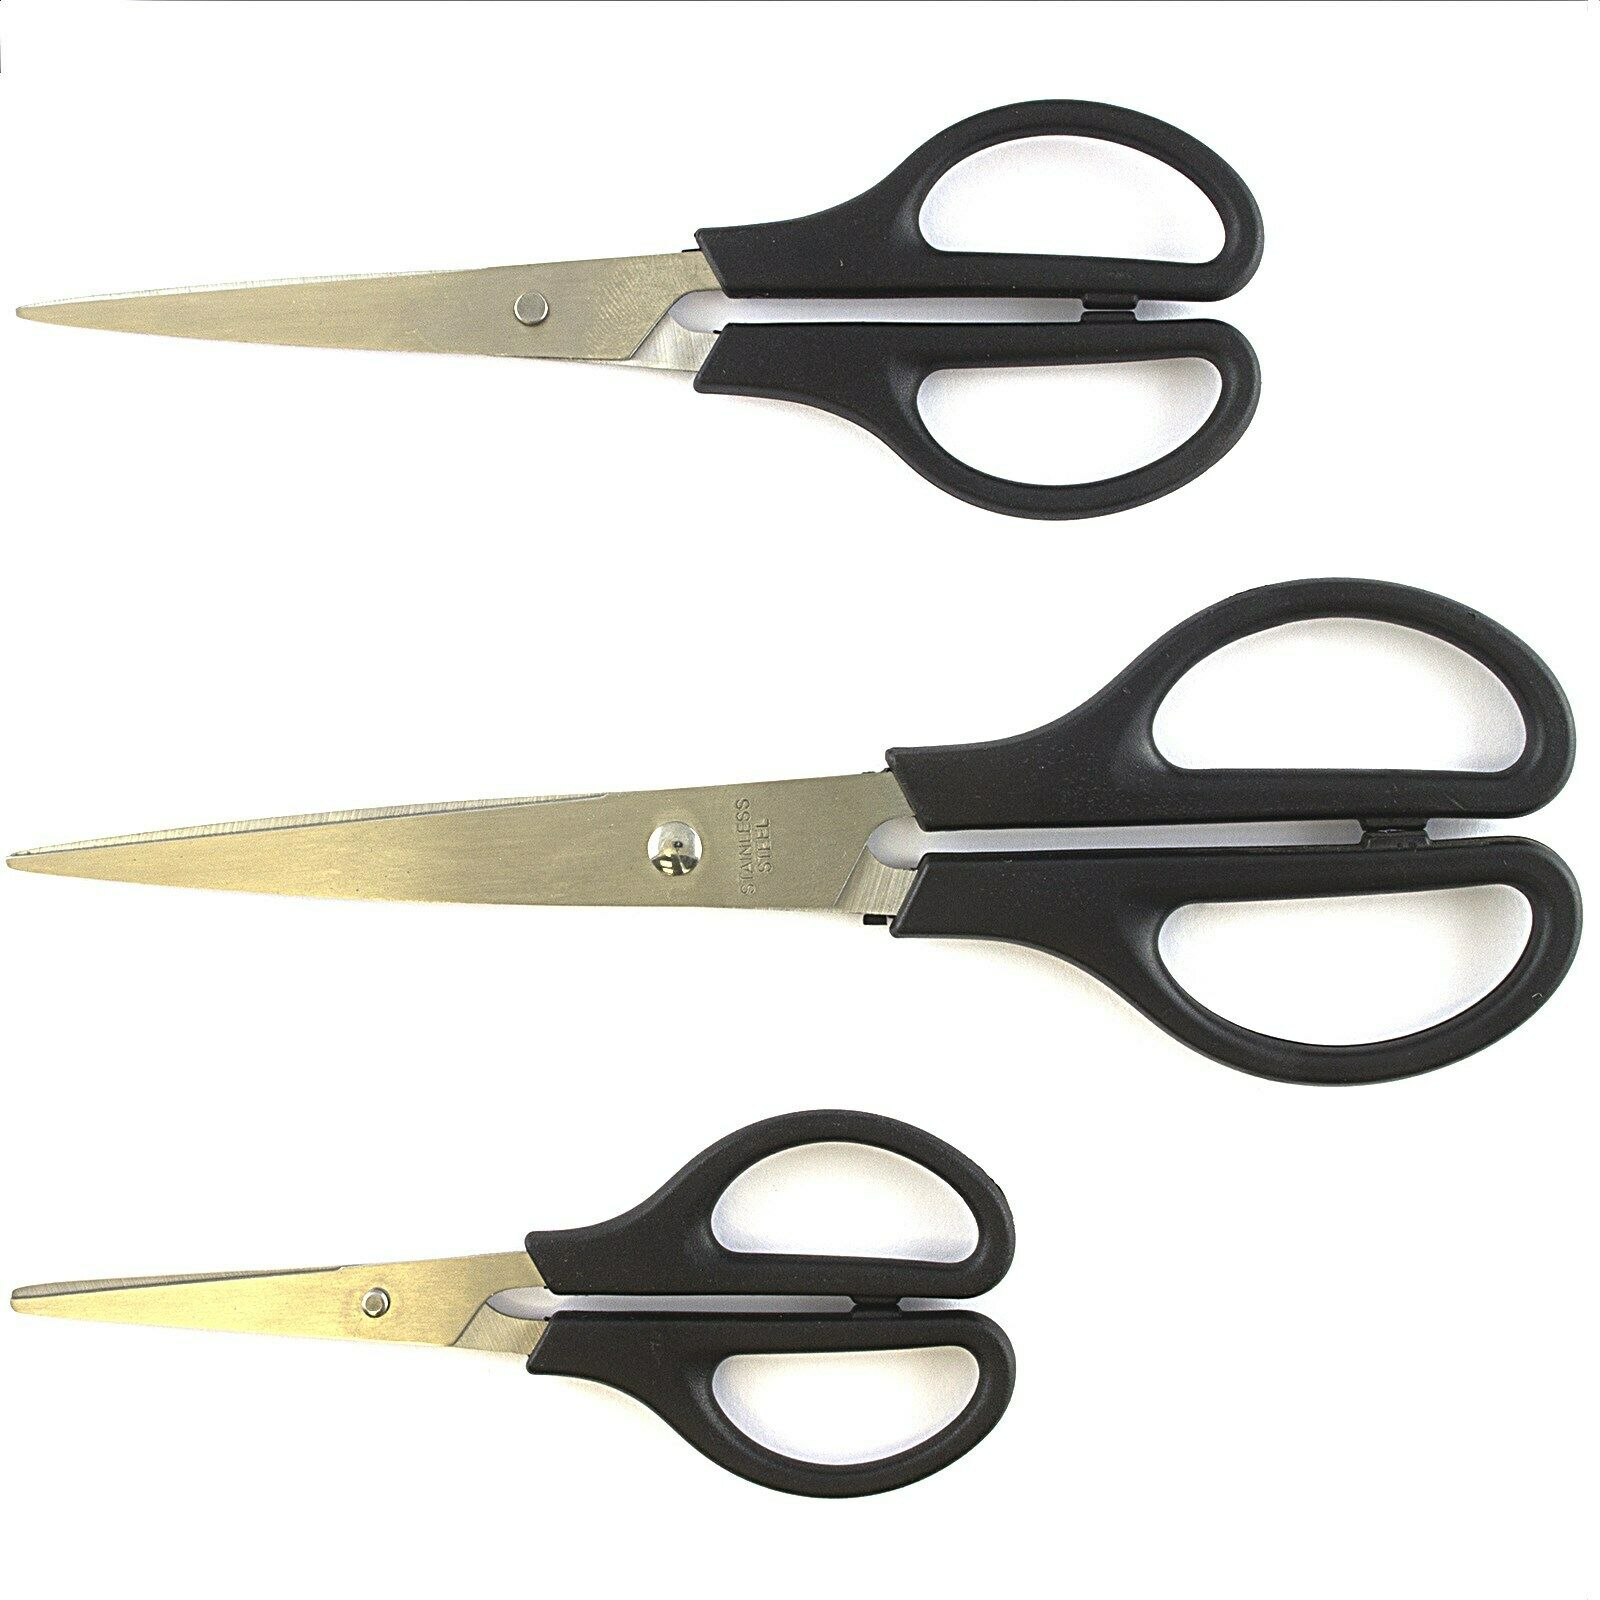 3 Pc Household Scissors Set School Office Cutting Sewing Arts Crafts Kitchen